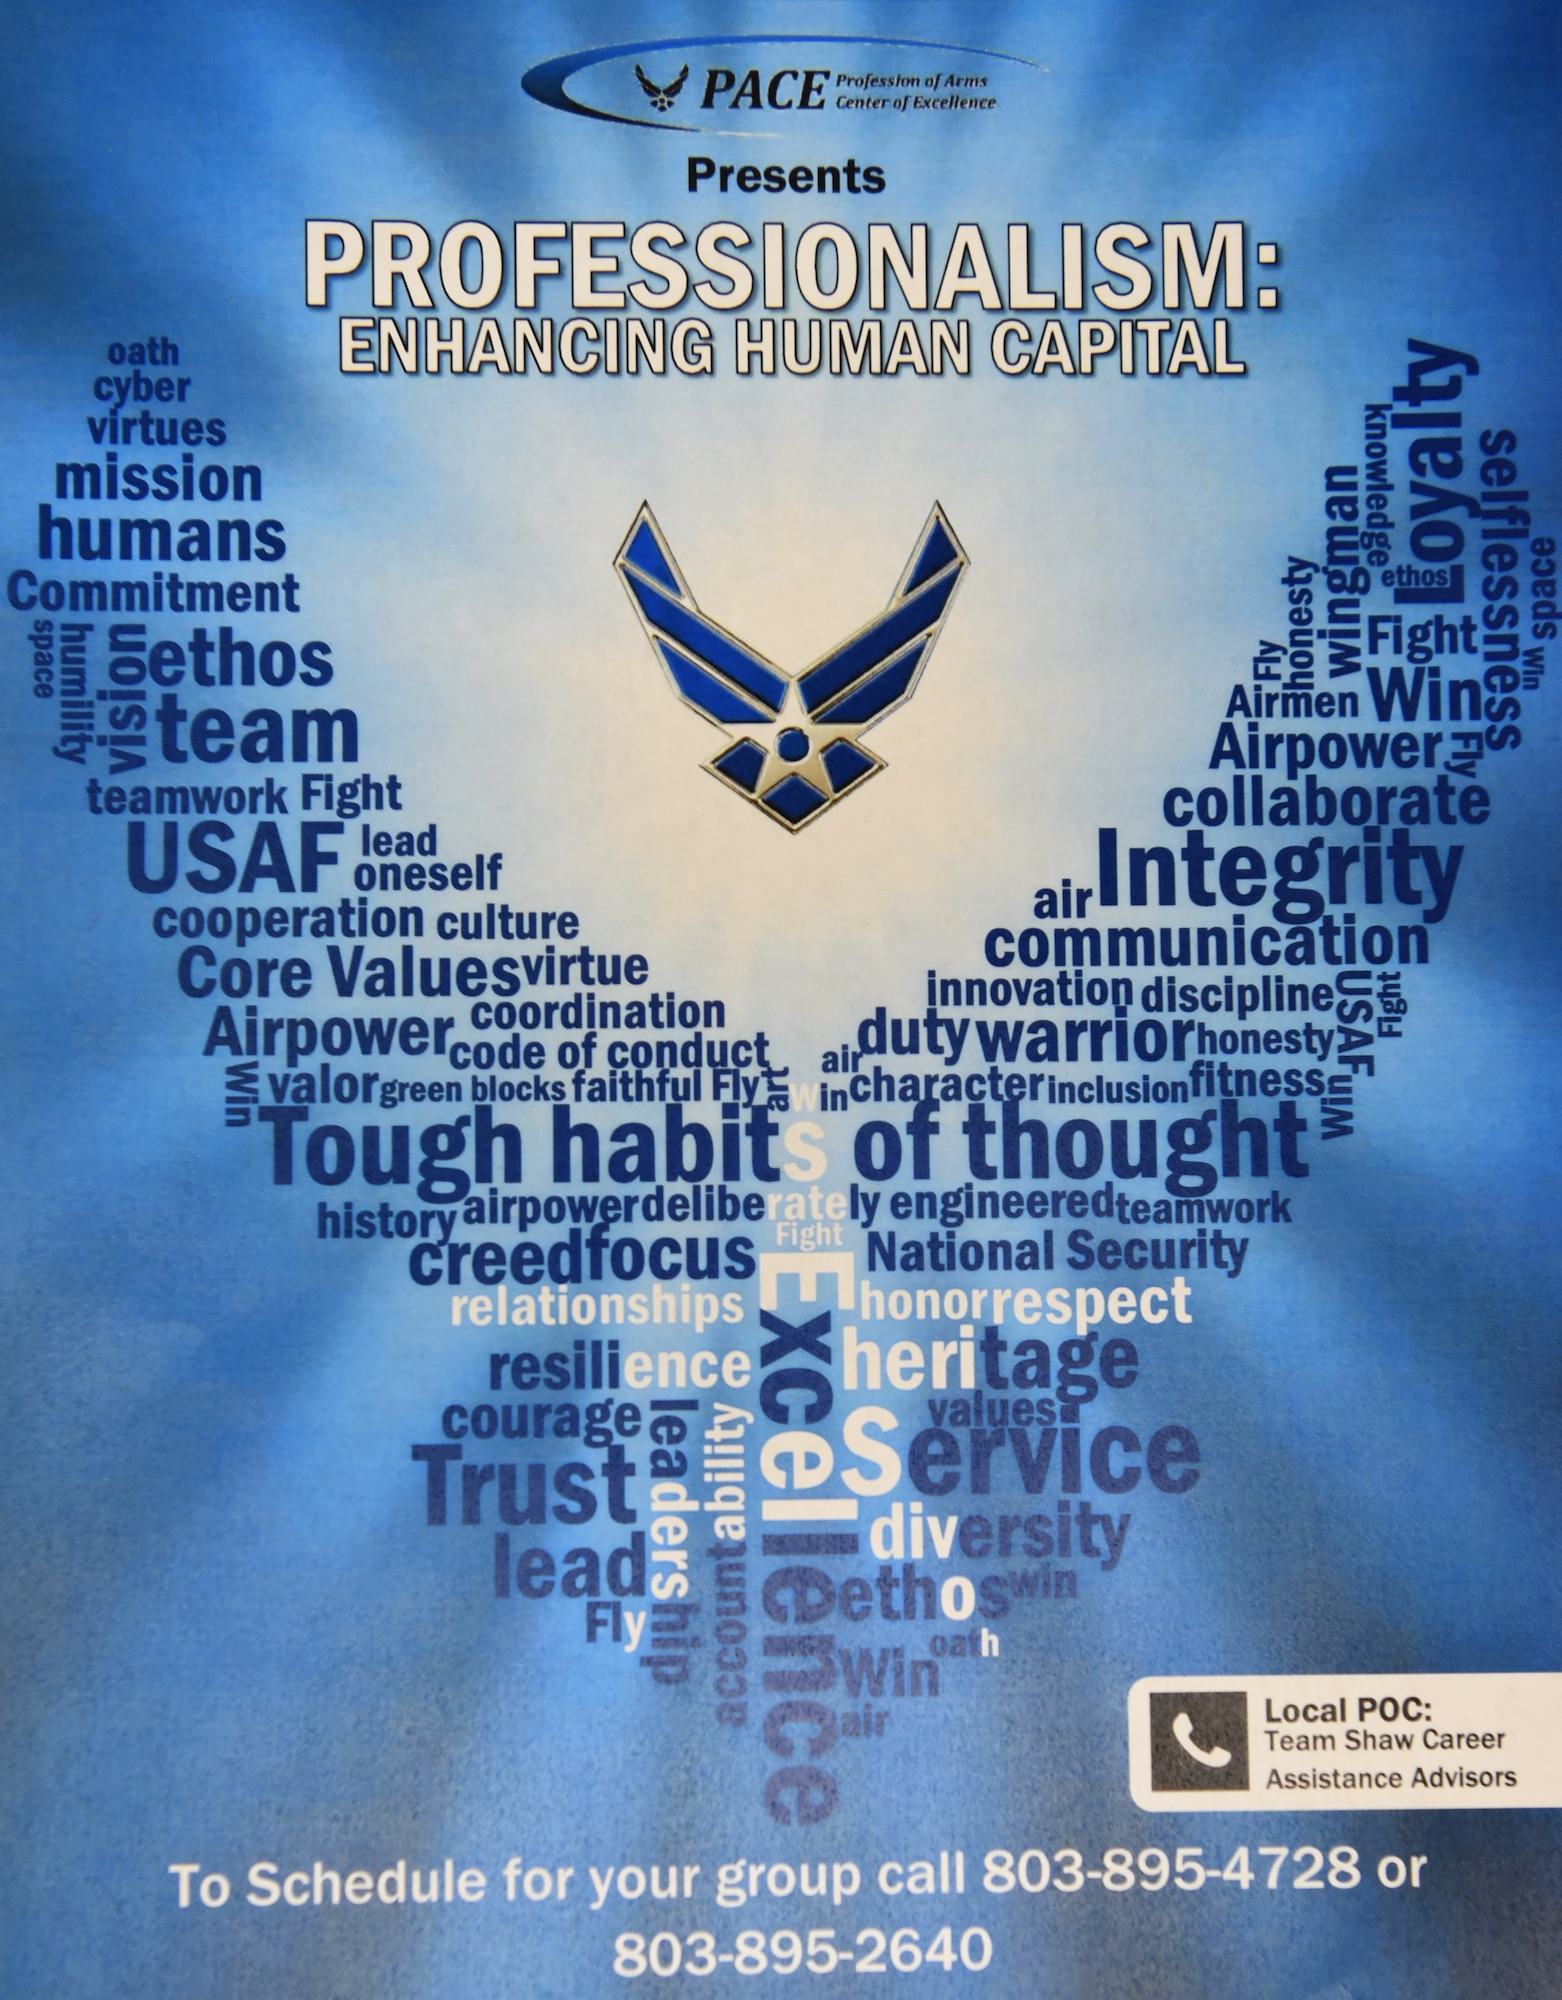 Career assistance advisors (CAA) provide service members with professional development and personalized counseling, and have developed a Commissioning Mentorship Panel allowing enlisted Airmen the opportunity to speak with officers who were once enlisted.